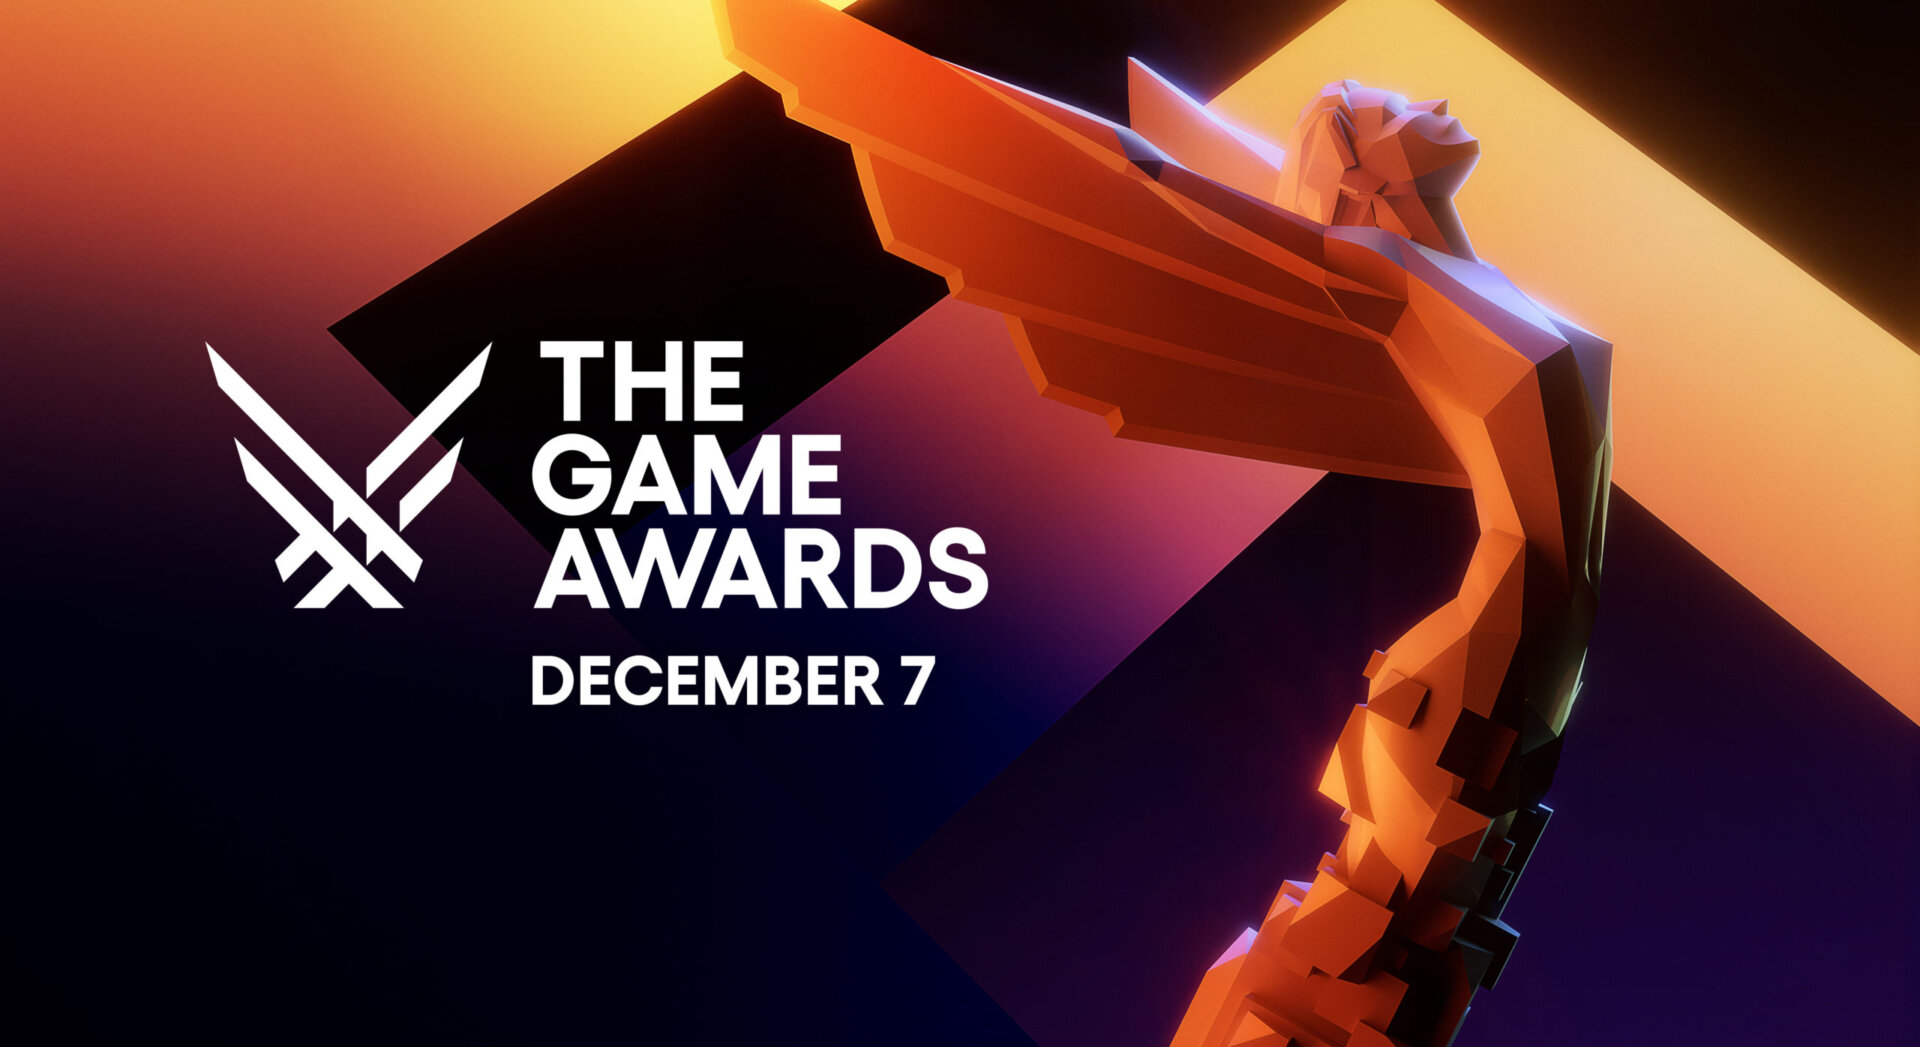 The Game Awards have fans abuzz over controversial winners and